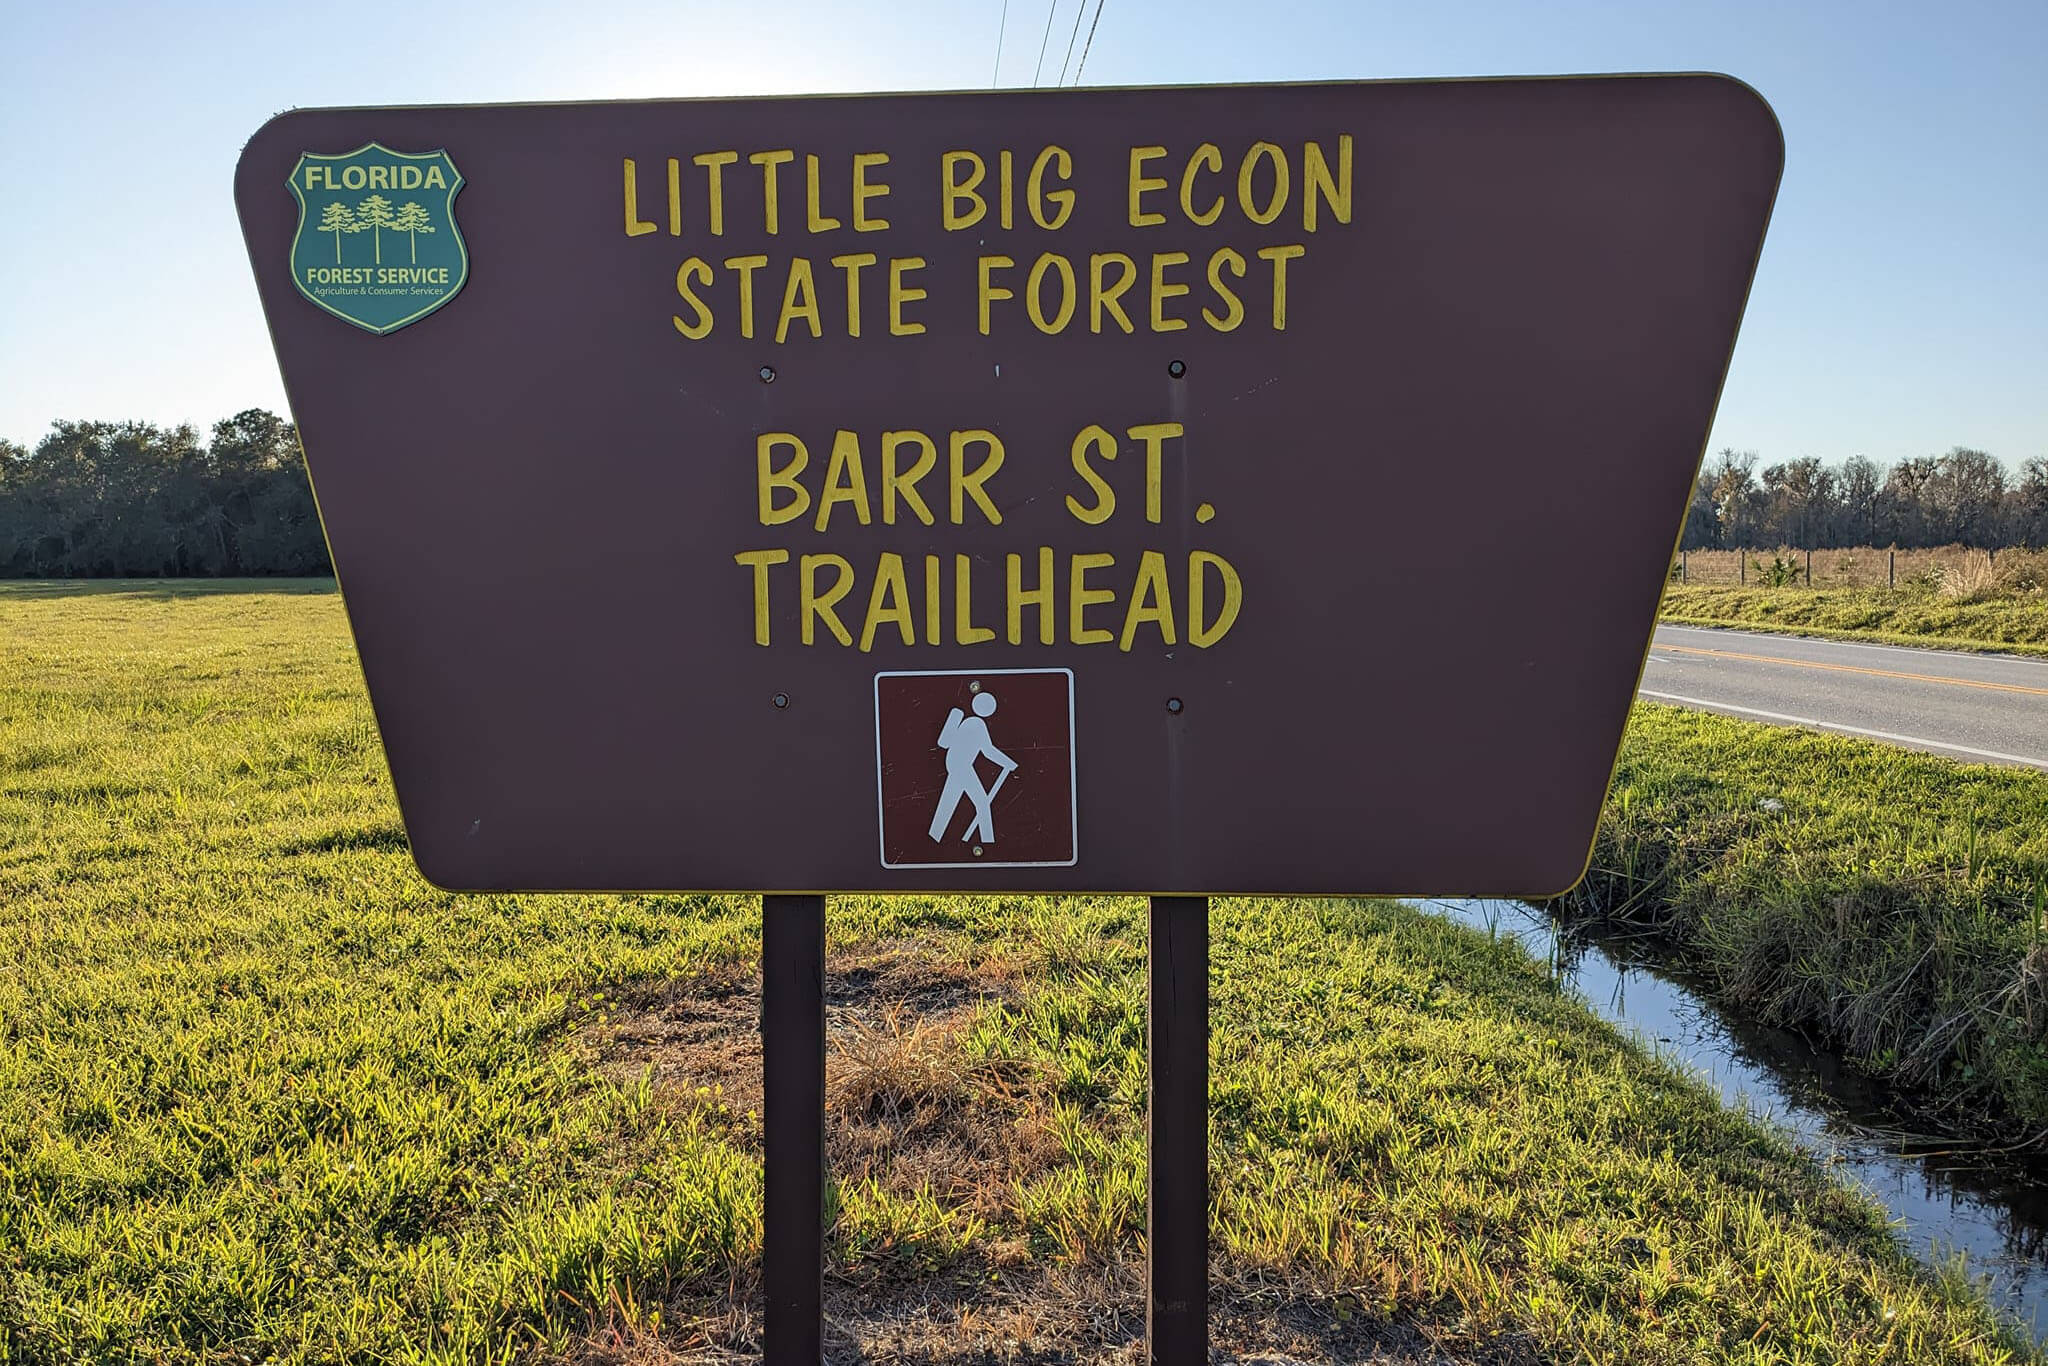 Little Big Econ State Forest.